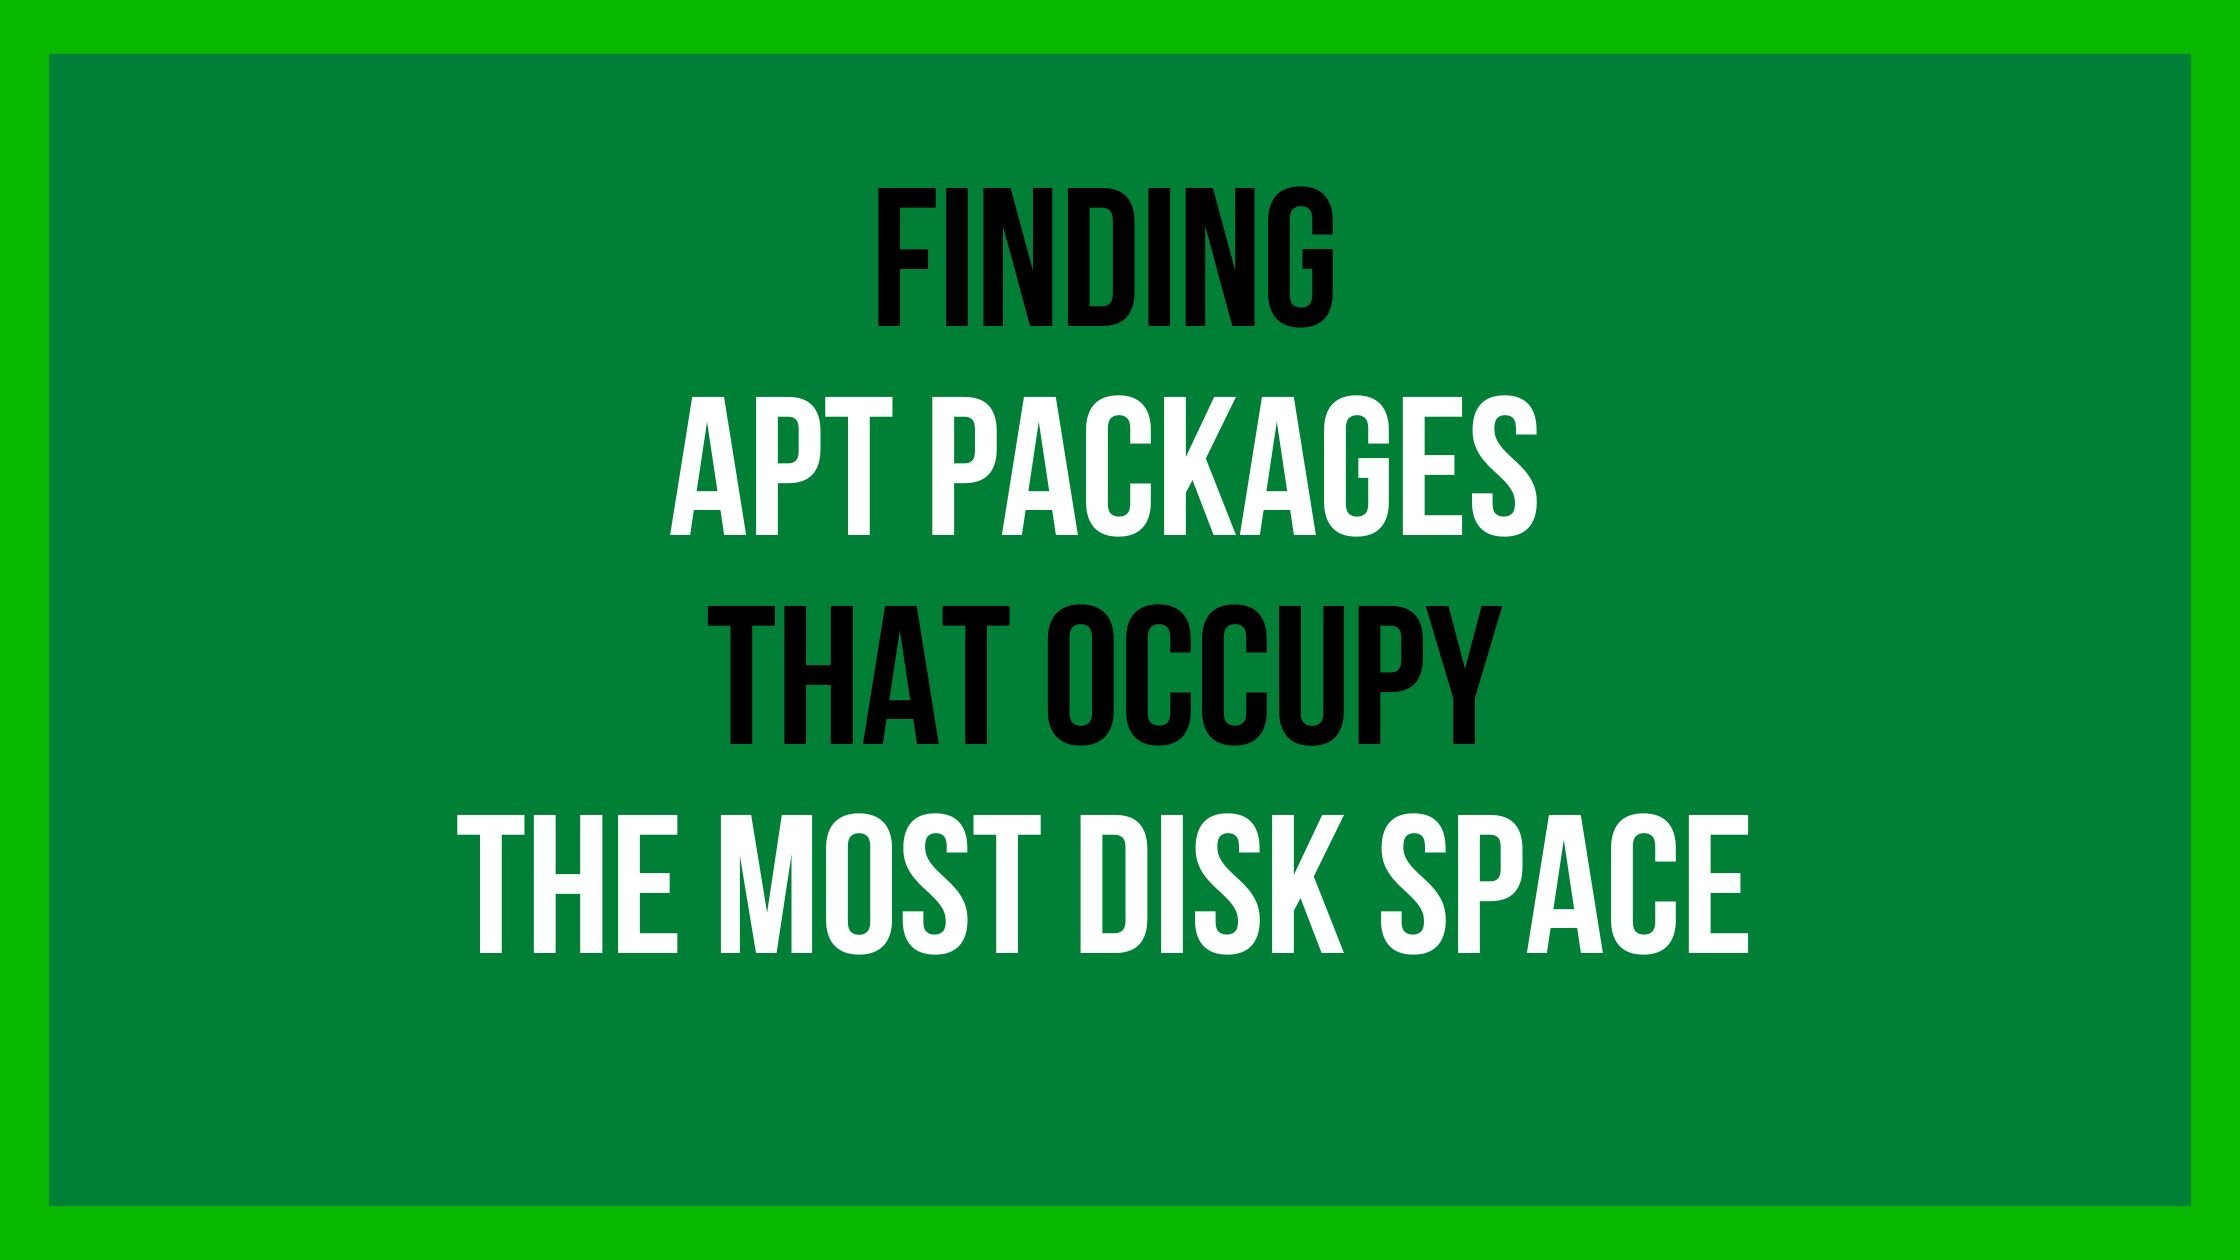 Finding APT Packages That Occupy The Most Disk Space On Debian/Ubuntu Linux